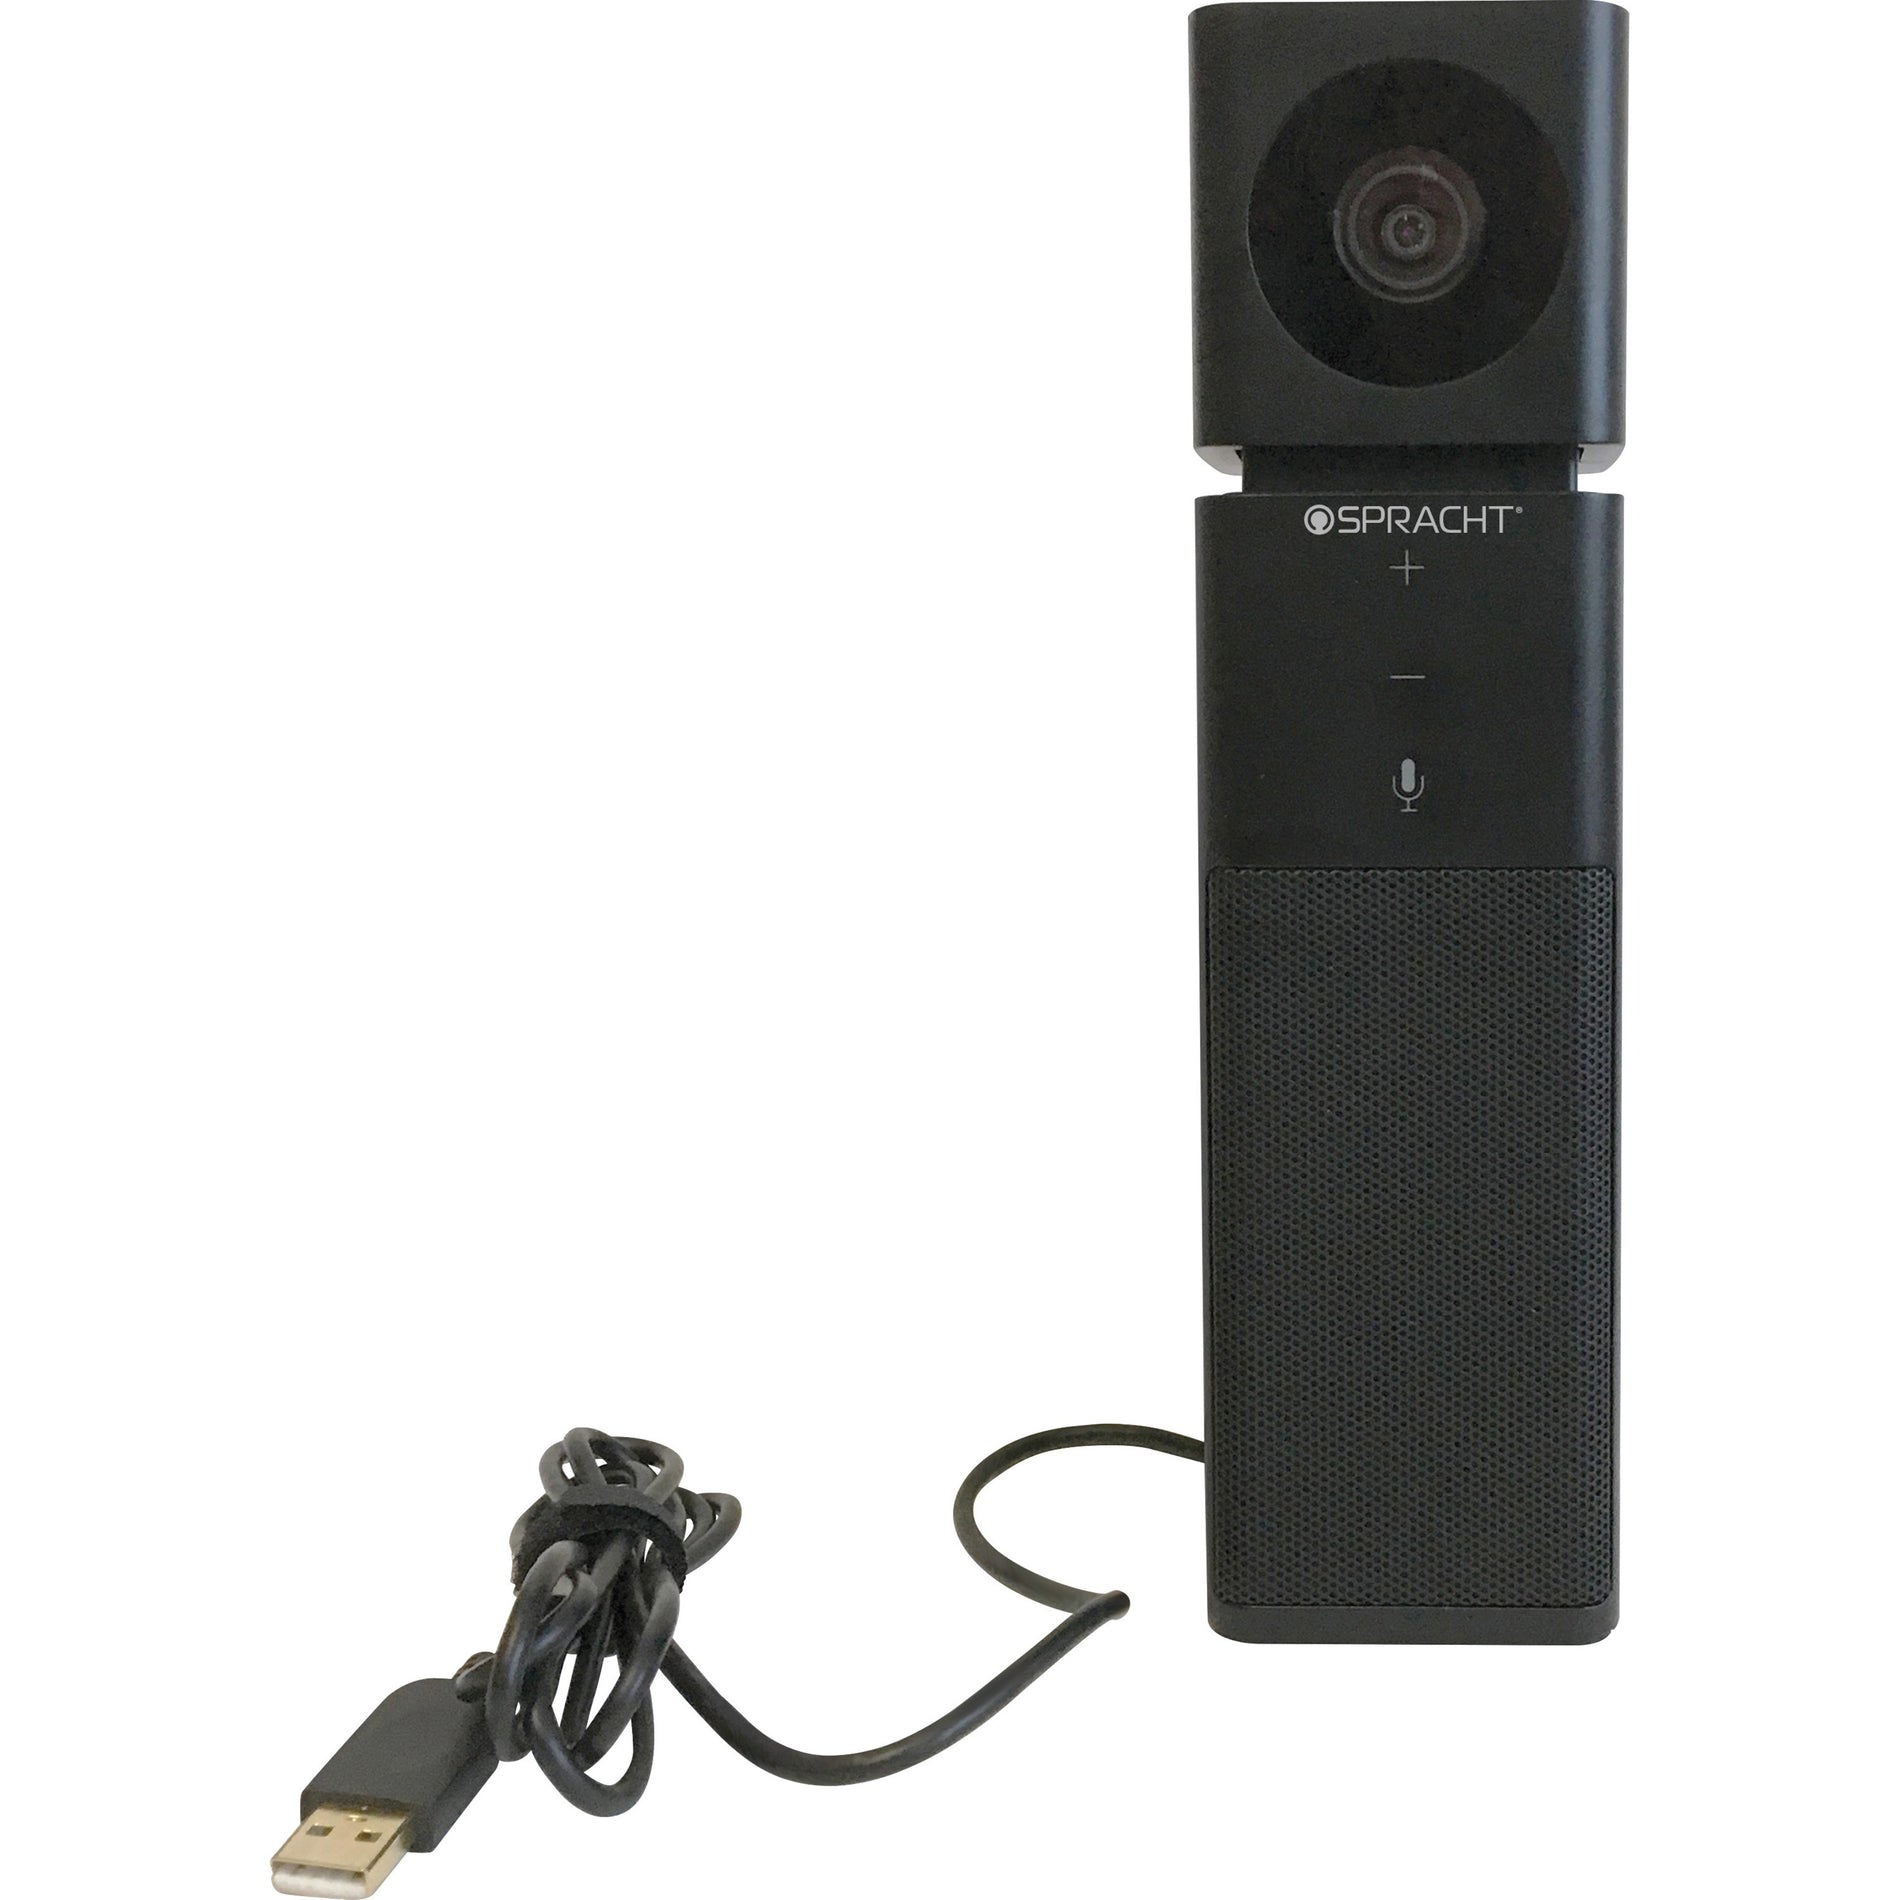 Spracht CC-2020 Aura Video Mate Video Conferencing Camera, 1080p Wide-Angle Lens, Built-in Microphone